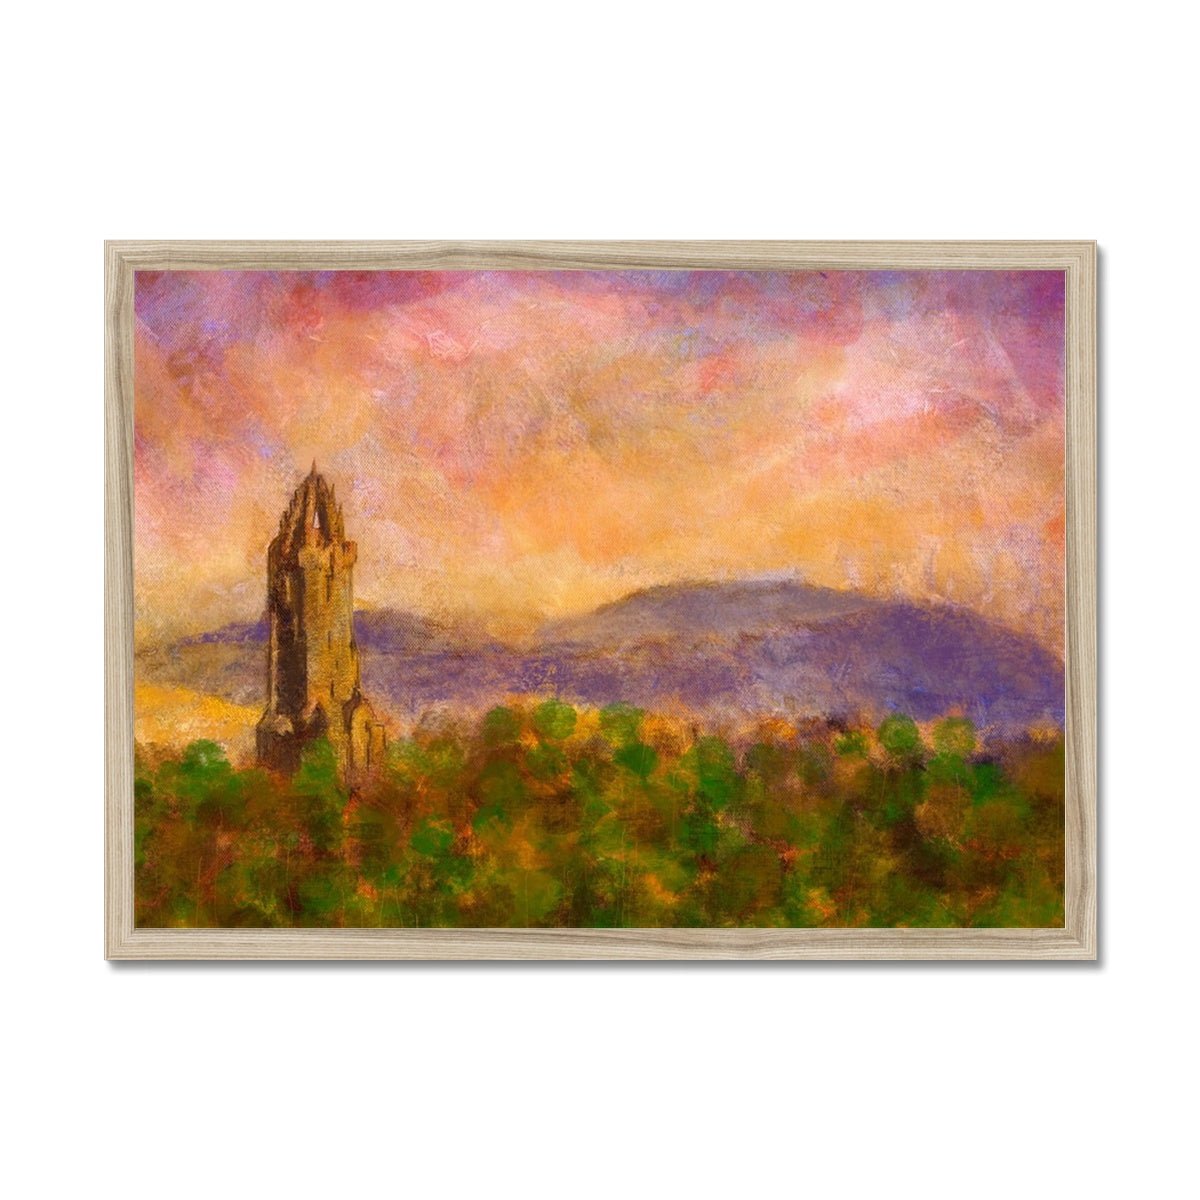 Wallace Monument Dusk Painting | Framed Prints From Scotland-Framed Prints-Historic & Iconic Scotland Art Gallery-A2 Landscape-Natural Frame-Paintings, Prints, Homeware, Art Gifts From Scotland By Scottish Artist Kevin Hunter